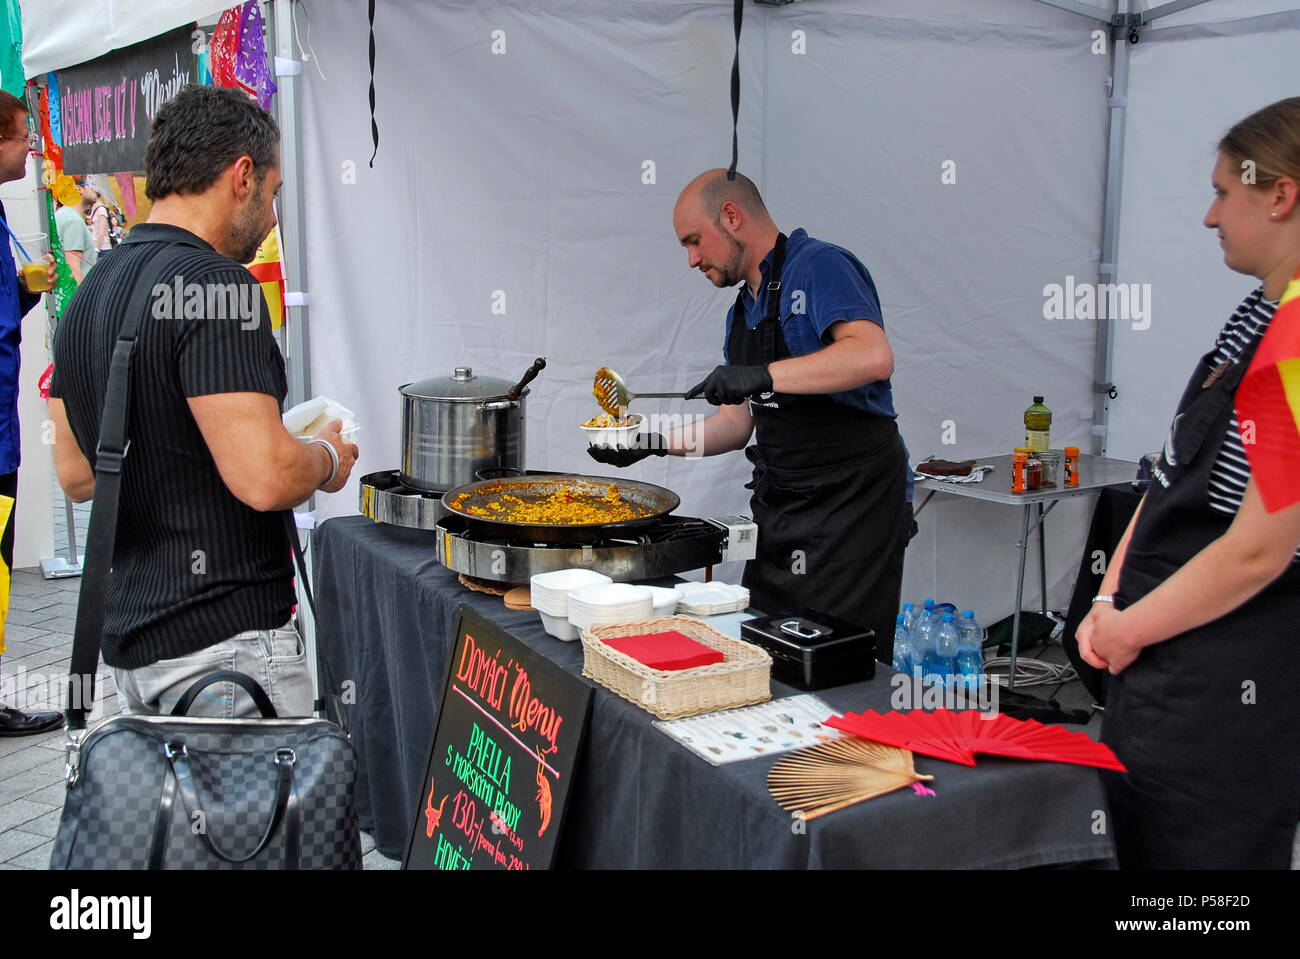 Food booth at Food and Beer Festival in Old Brno, South Moravia, Czech Republic Stock Photo